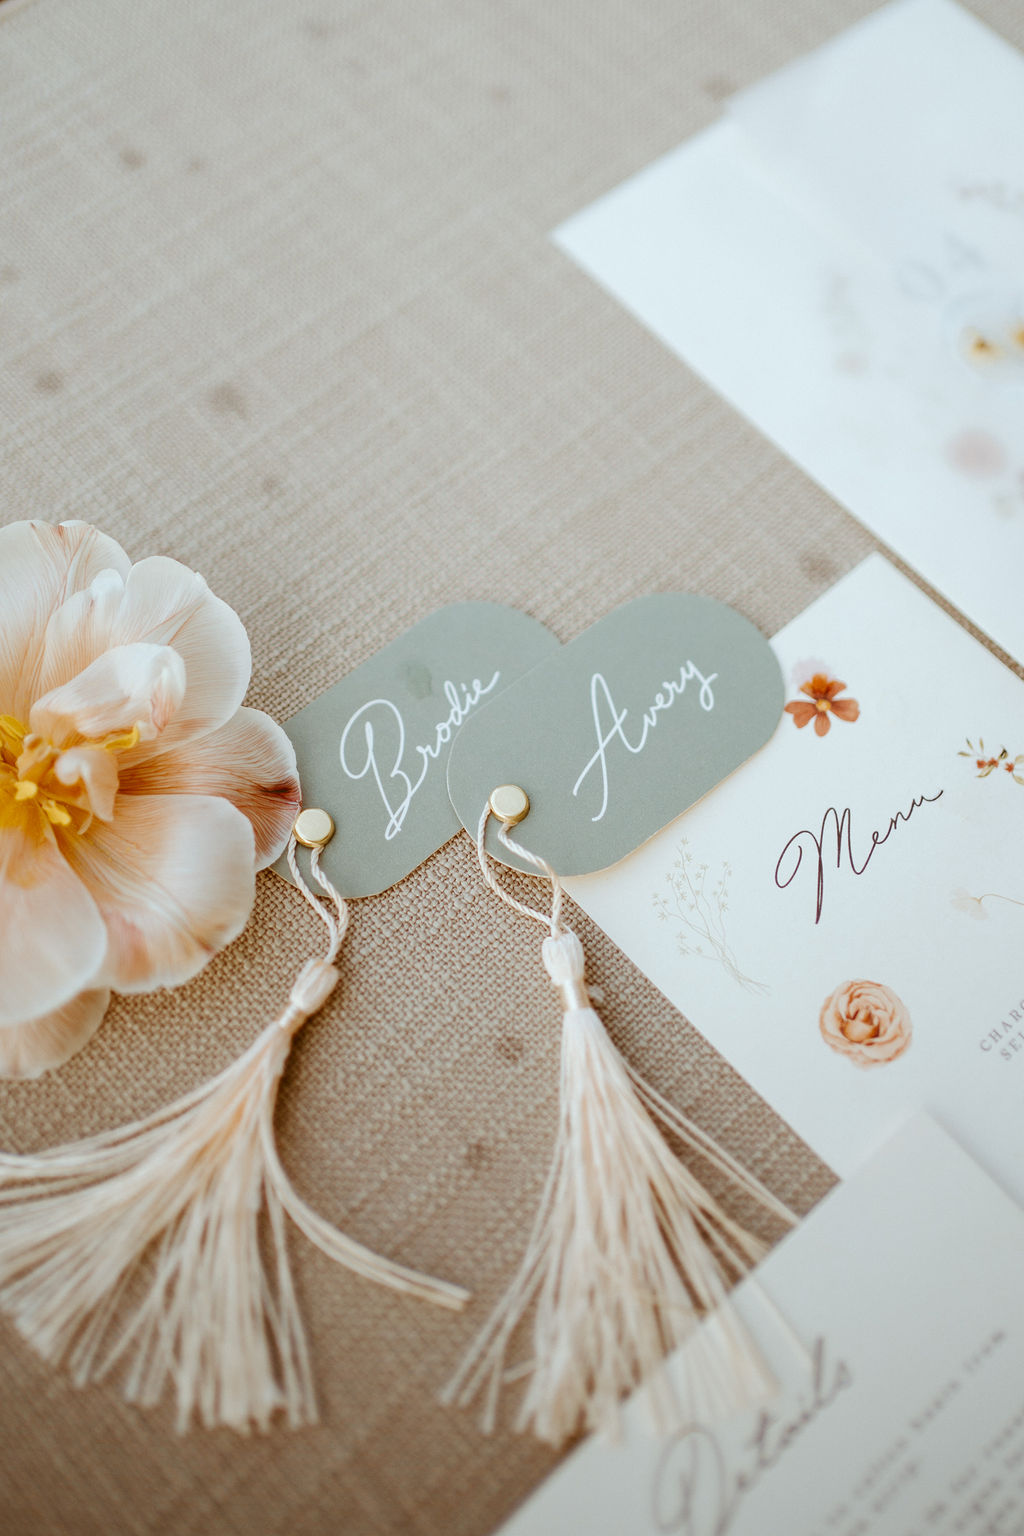 Close up of the couples name tag stationary. Their names written in a soft white cursive lettering on a grey tag with white tassel clasped on. 